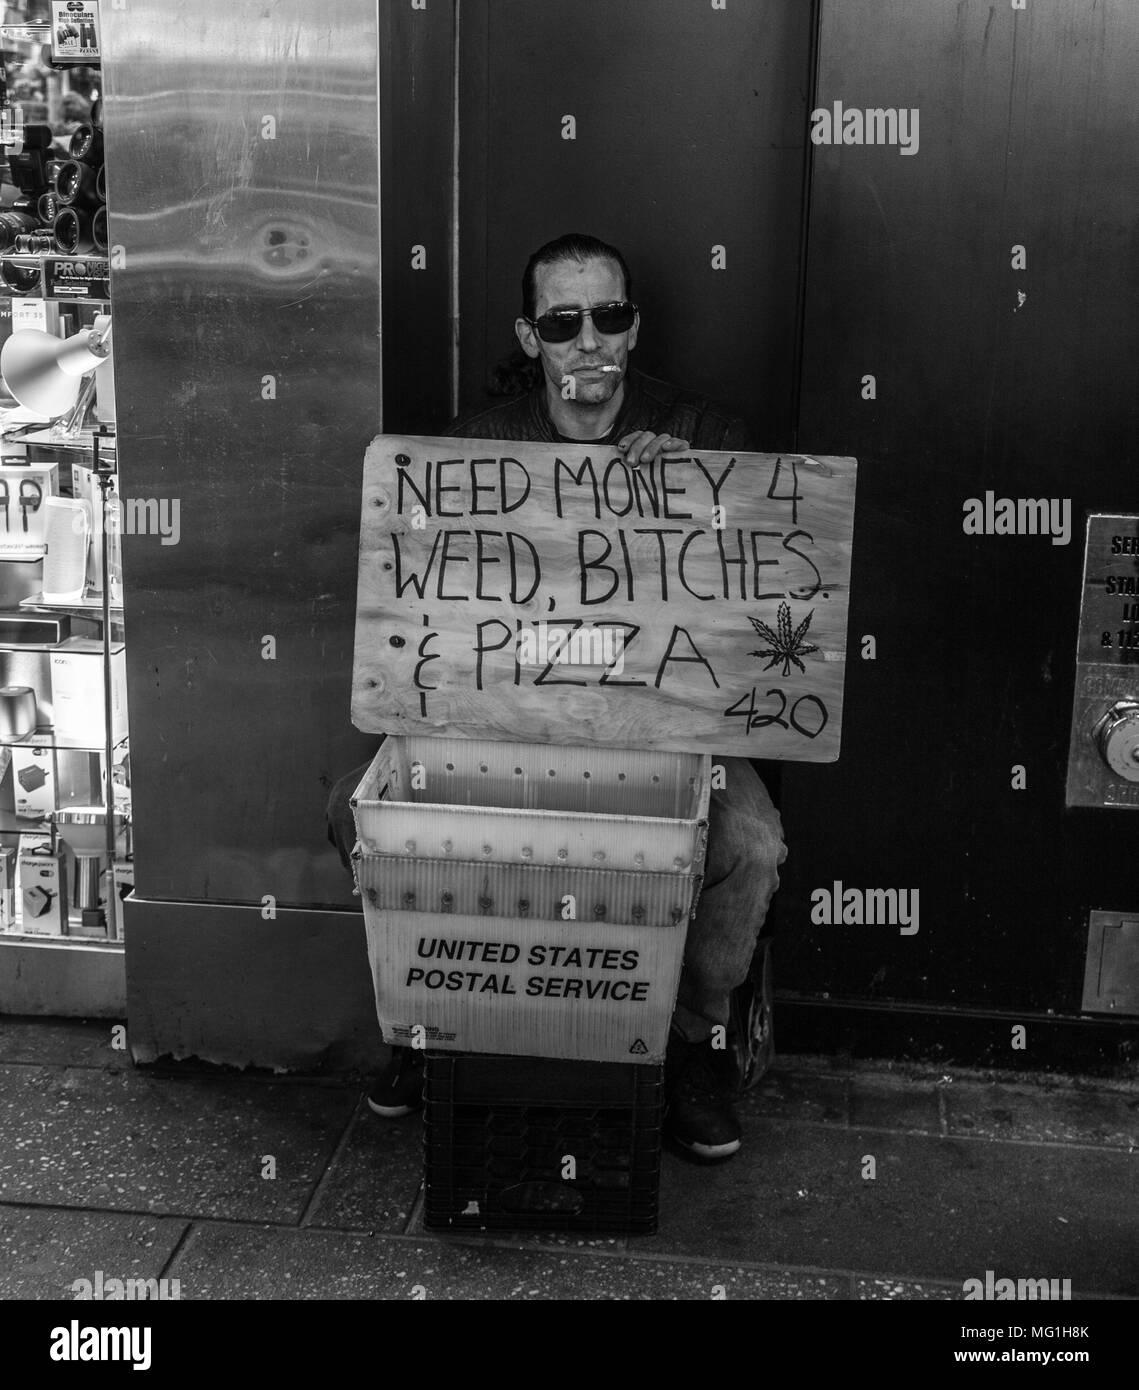 Panhandler rue, Times Square NYC Banque D'Images